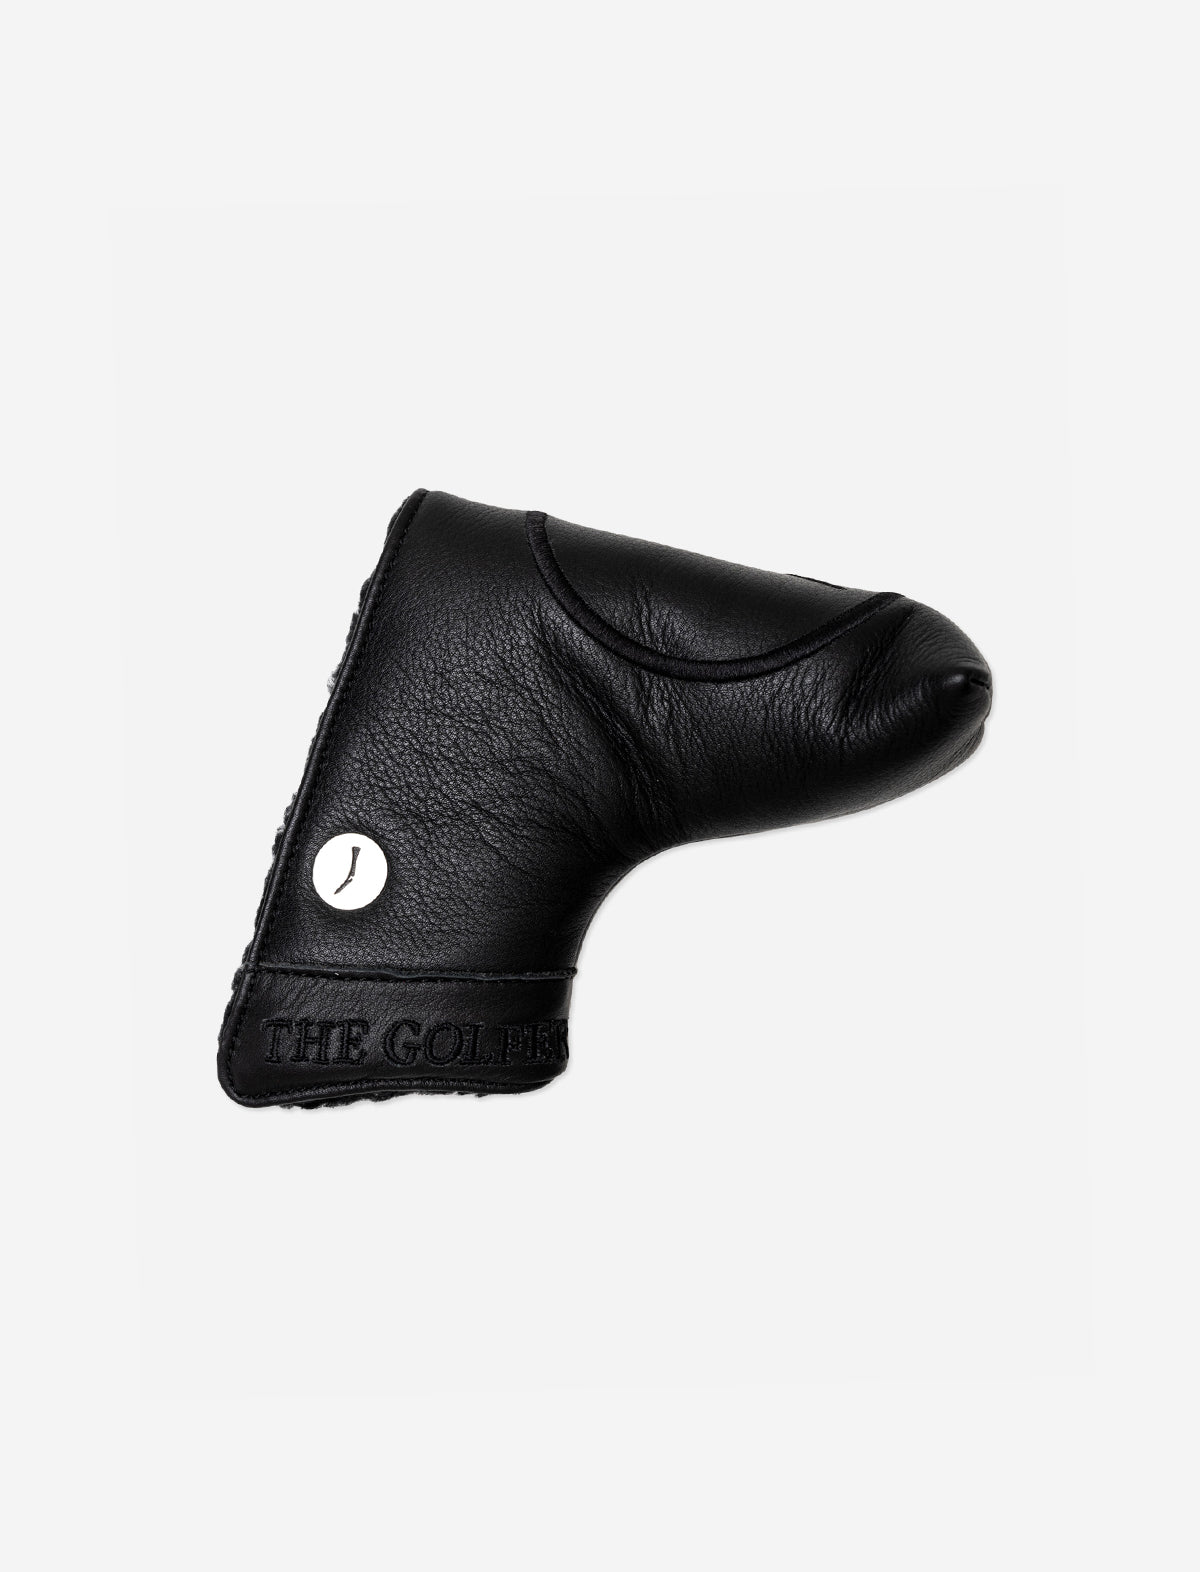 THE GOLFERS JOURNAL The Blade Putter Cover in Black